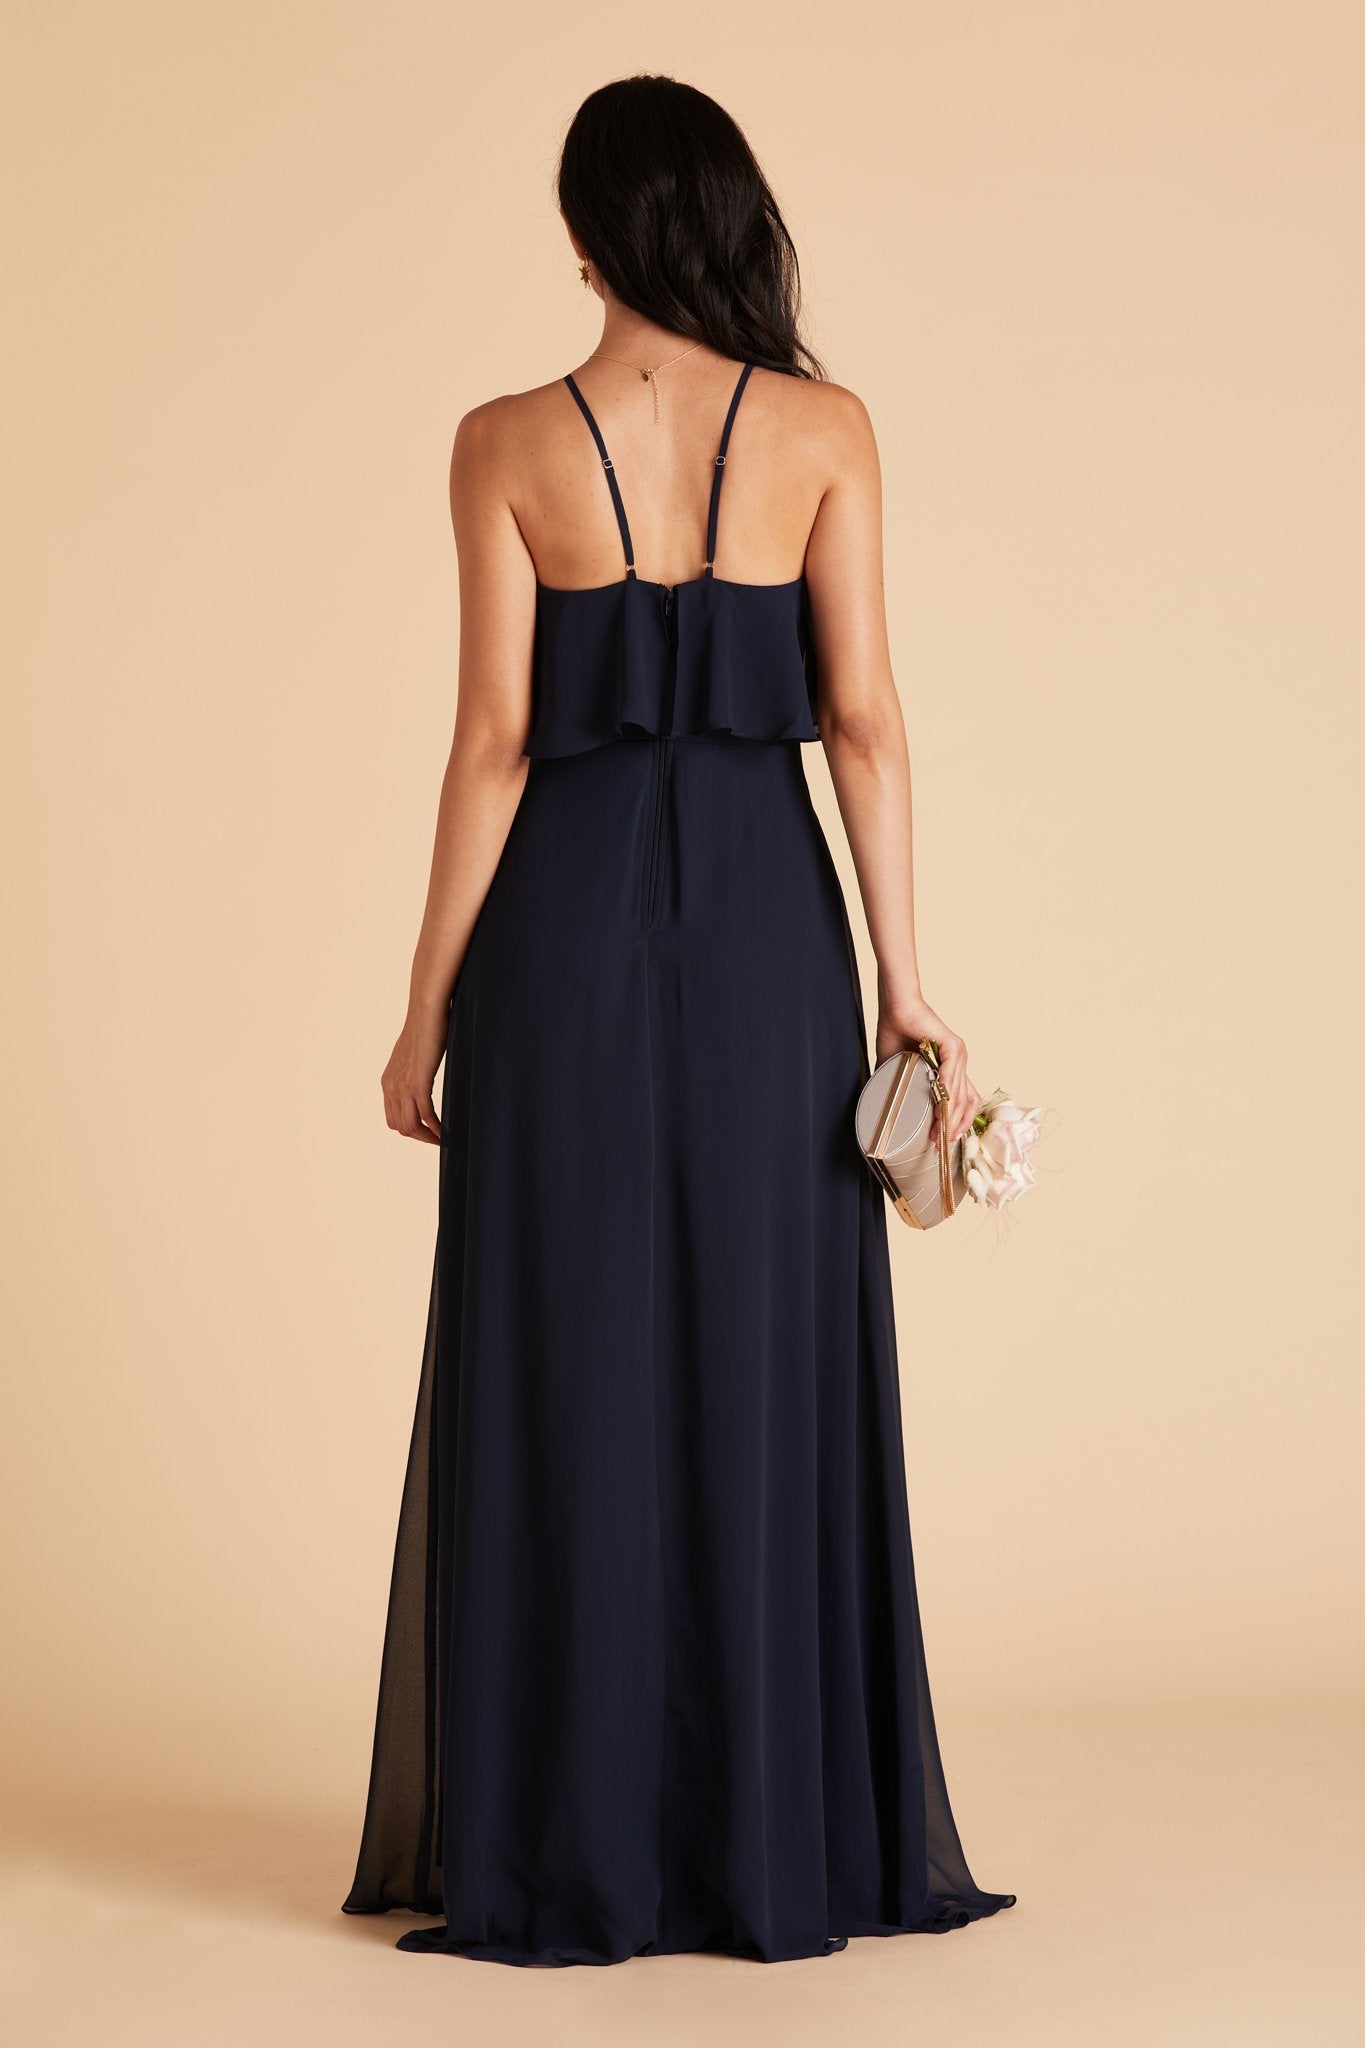 Jules bridesmaid dress in navy blue chiffon by Birdy Grey, back view